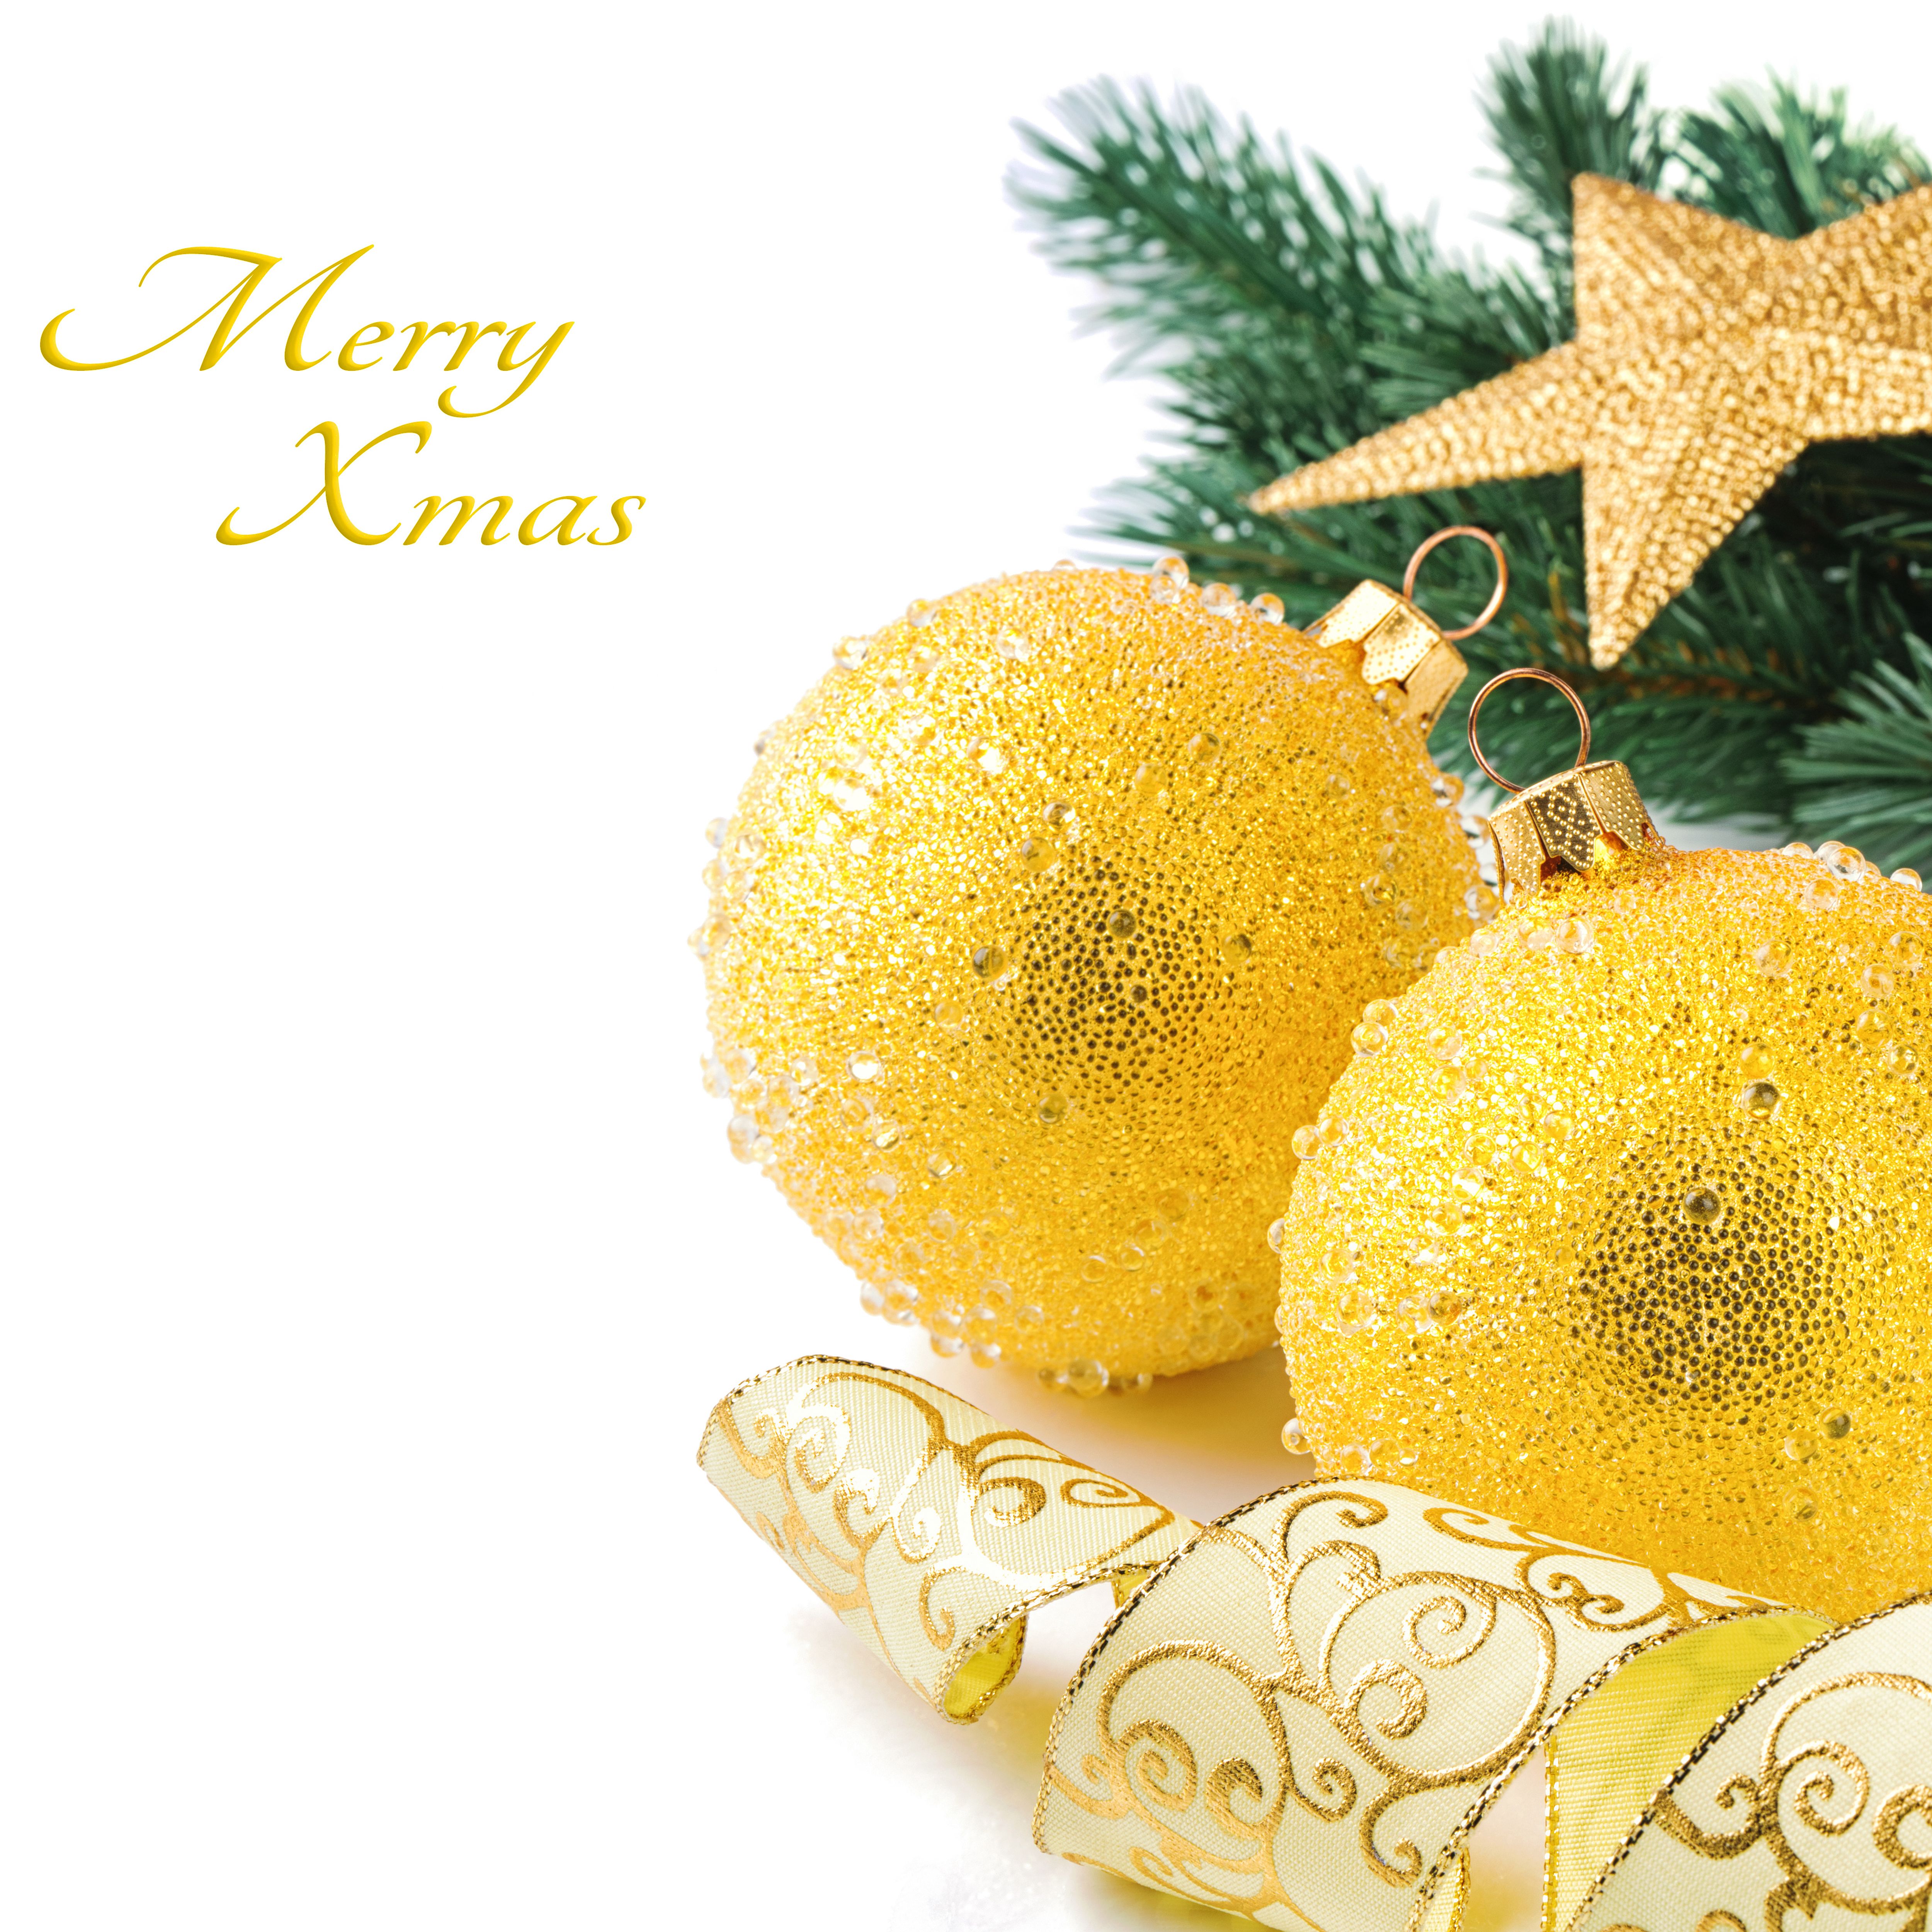 Snowy Christmas Background With Yellow Christmas Balls Quality Image And Transparent PNG Free Clipart